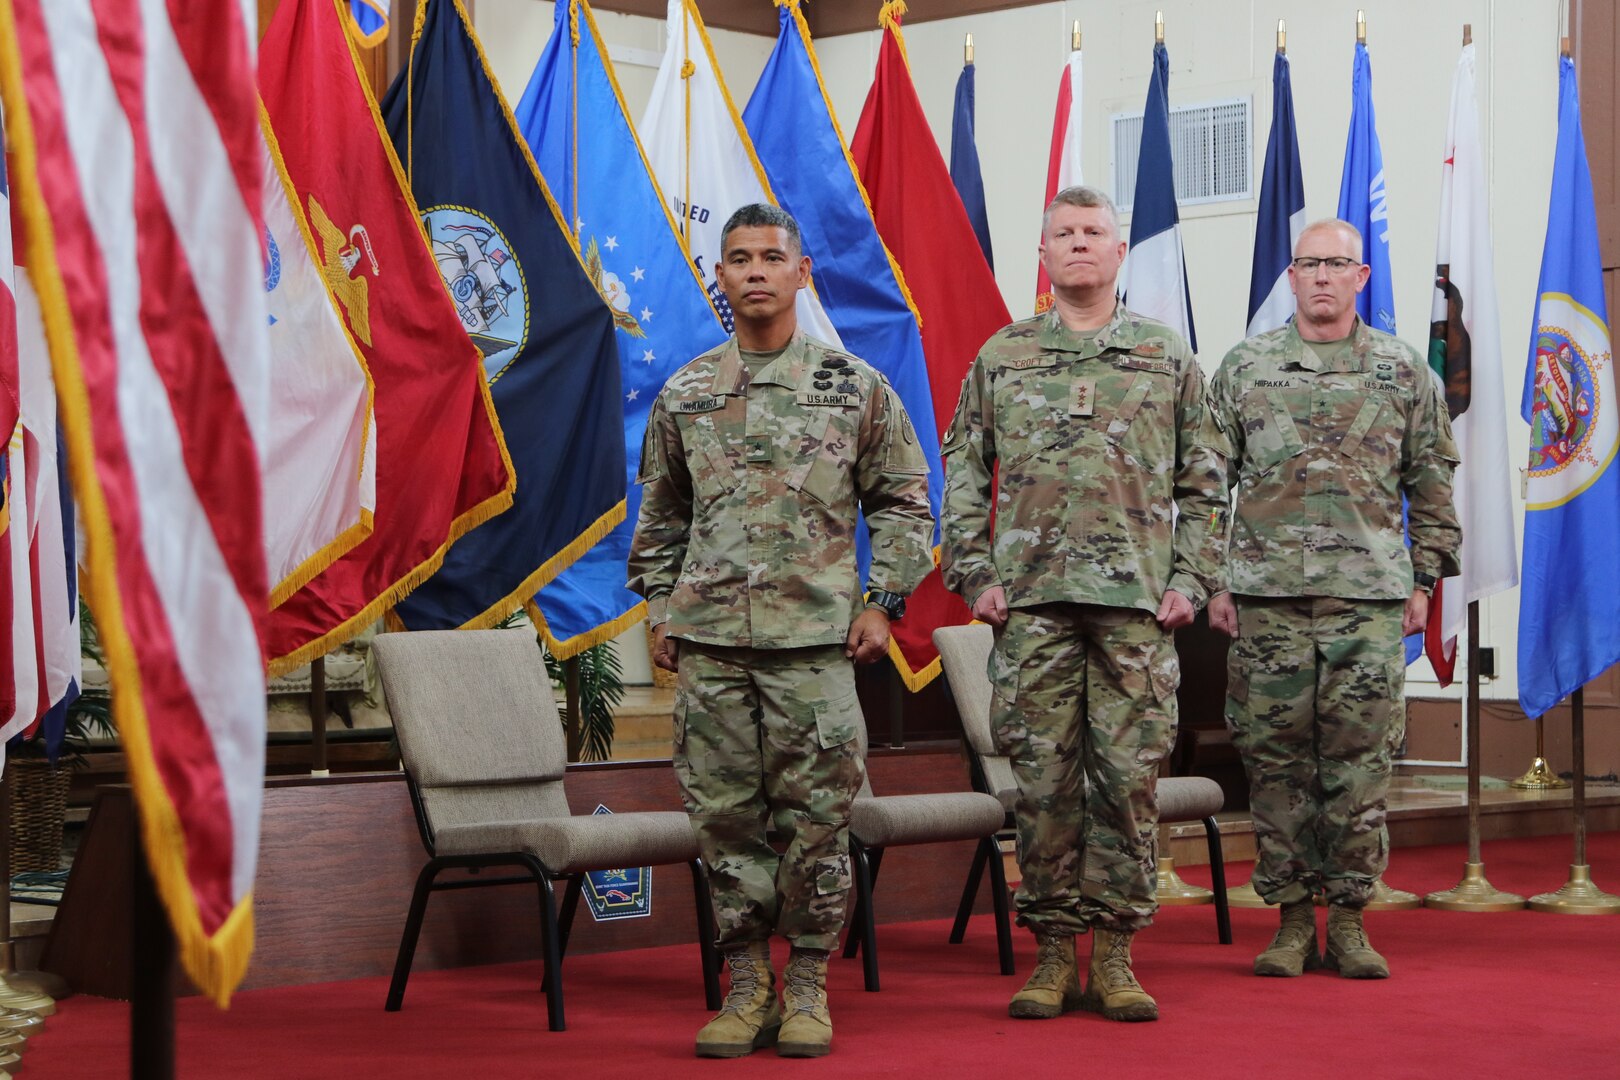 U.S. Army Brig. Gen. Lance Okamura relinquished command of Joint Task Force Guantanamo to U.S. Army Brig. Gen. Scott Hiipakka, during a ceremony Oct. 21, 2022.